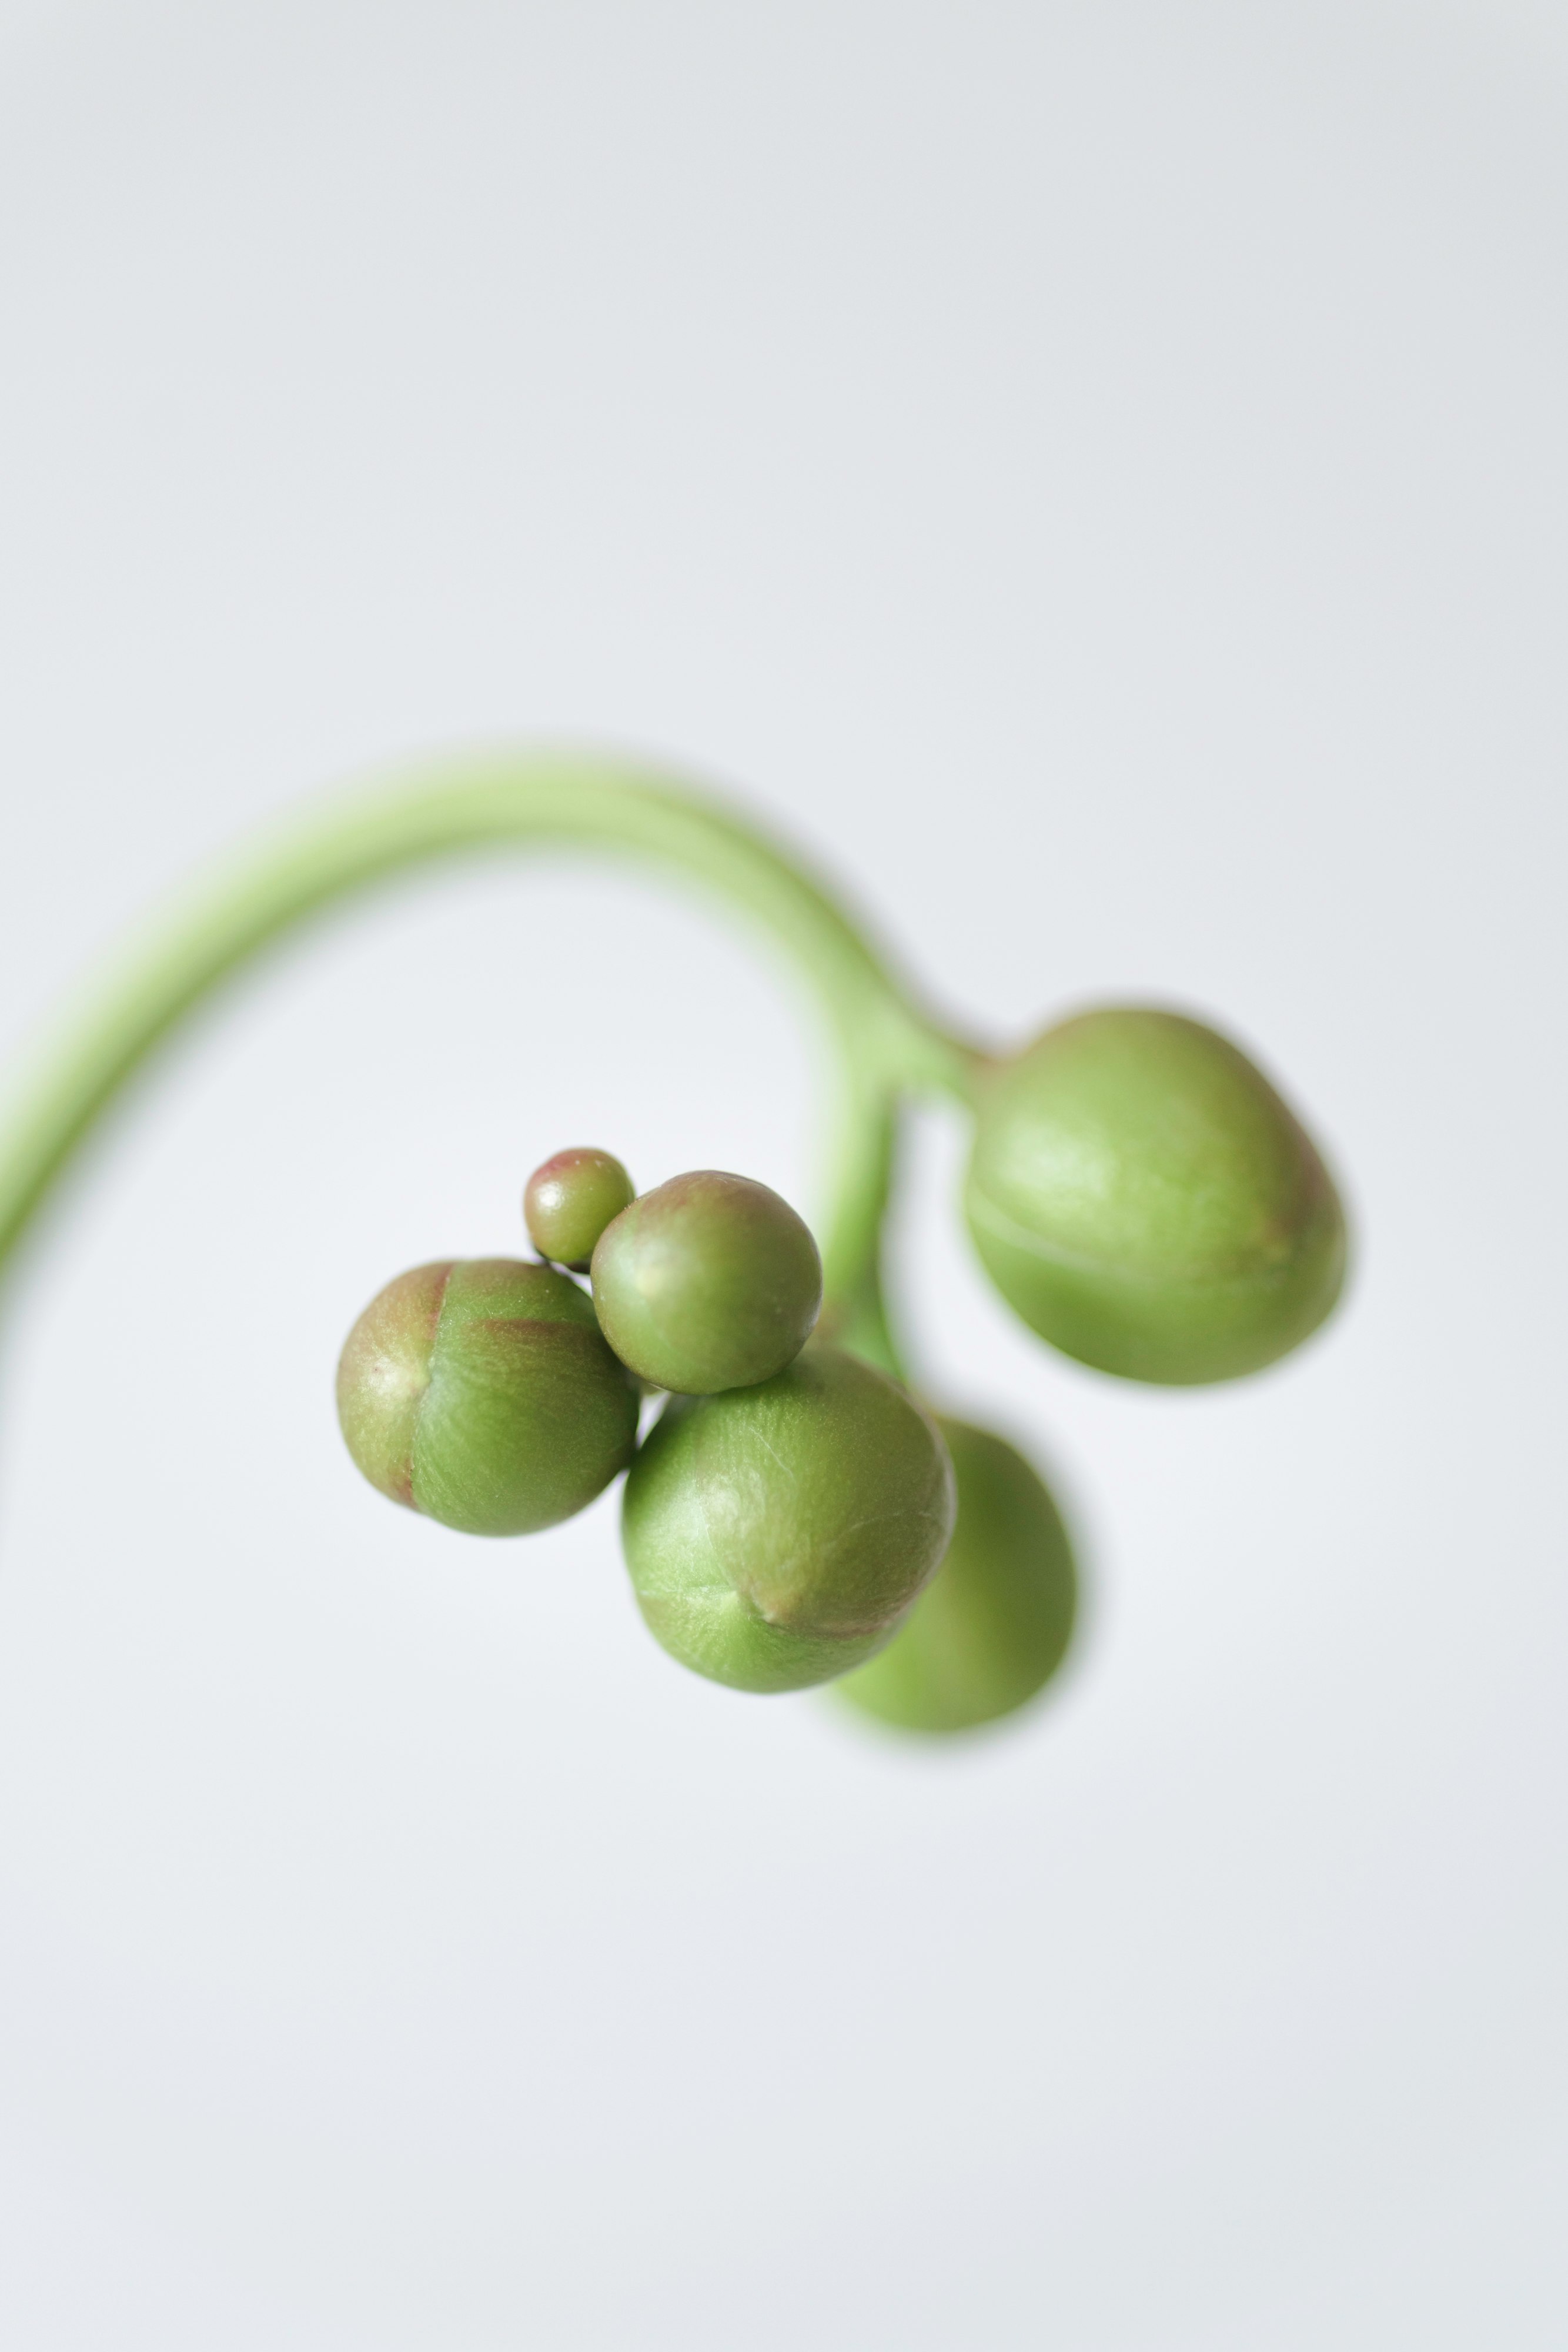 green round fruit with white background